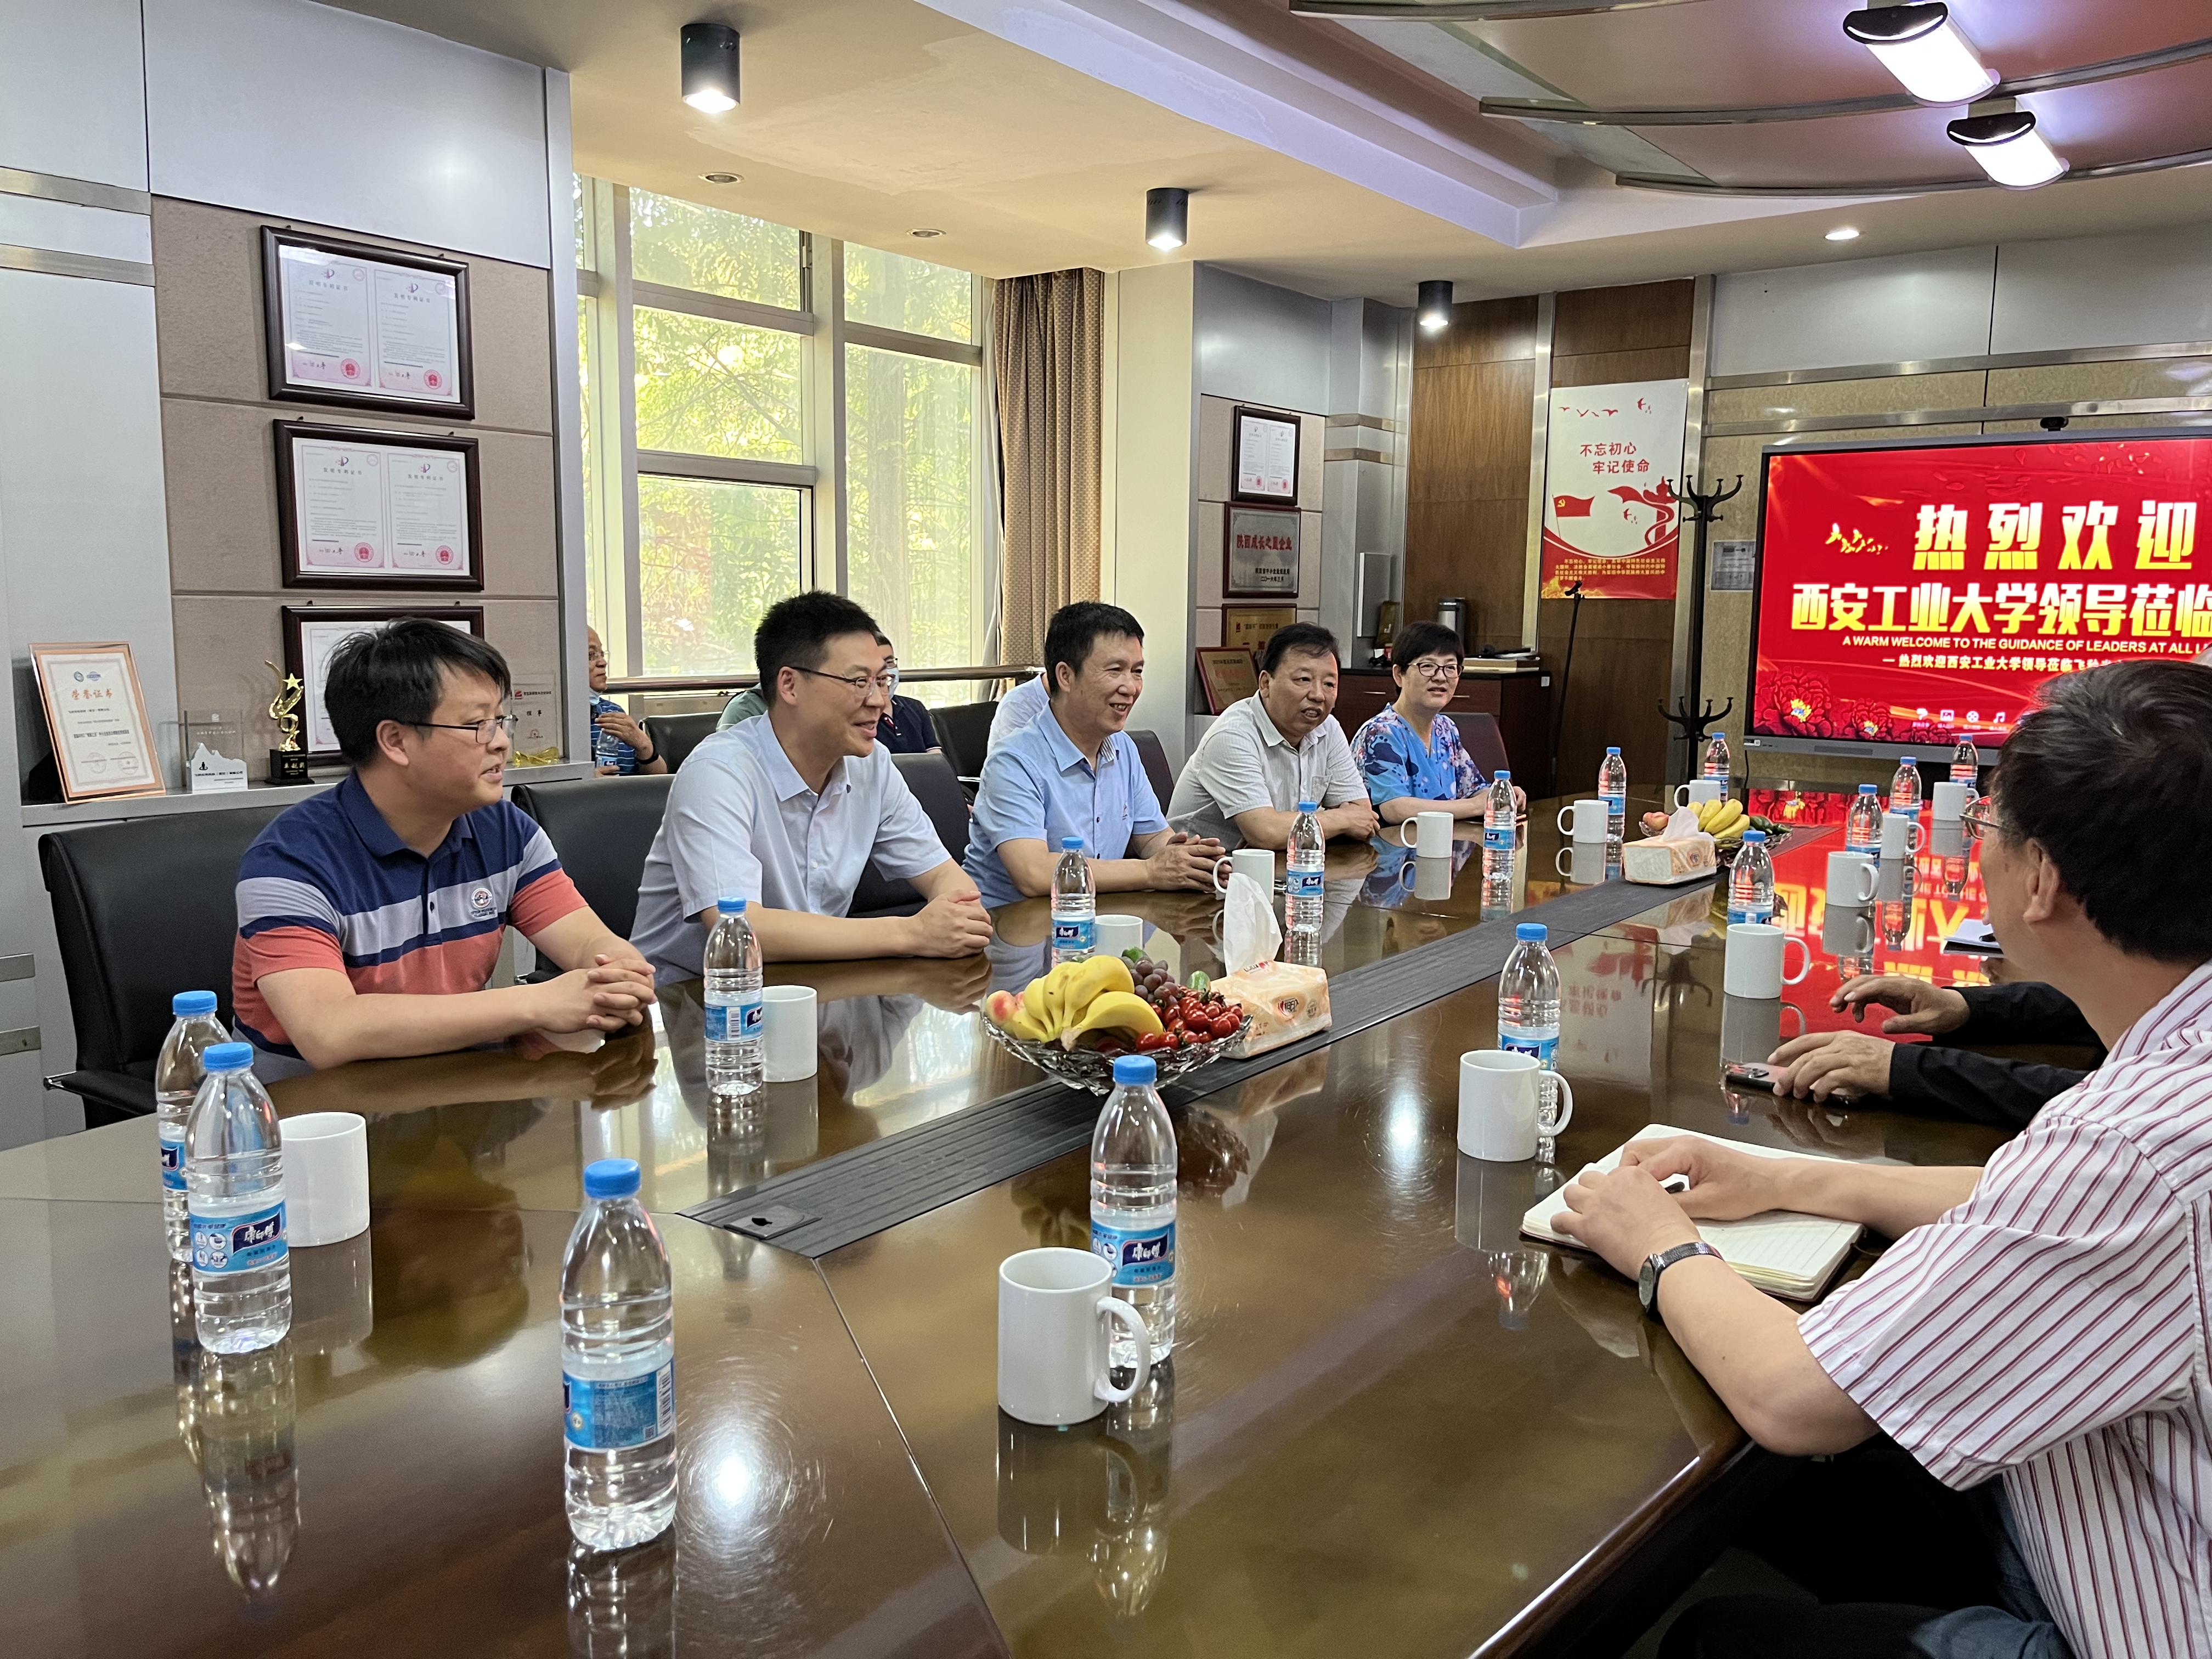 Leaders of Xi'an University of technology led a team to our company to investigate and deeply promote university enterprise cooperation